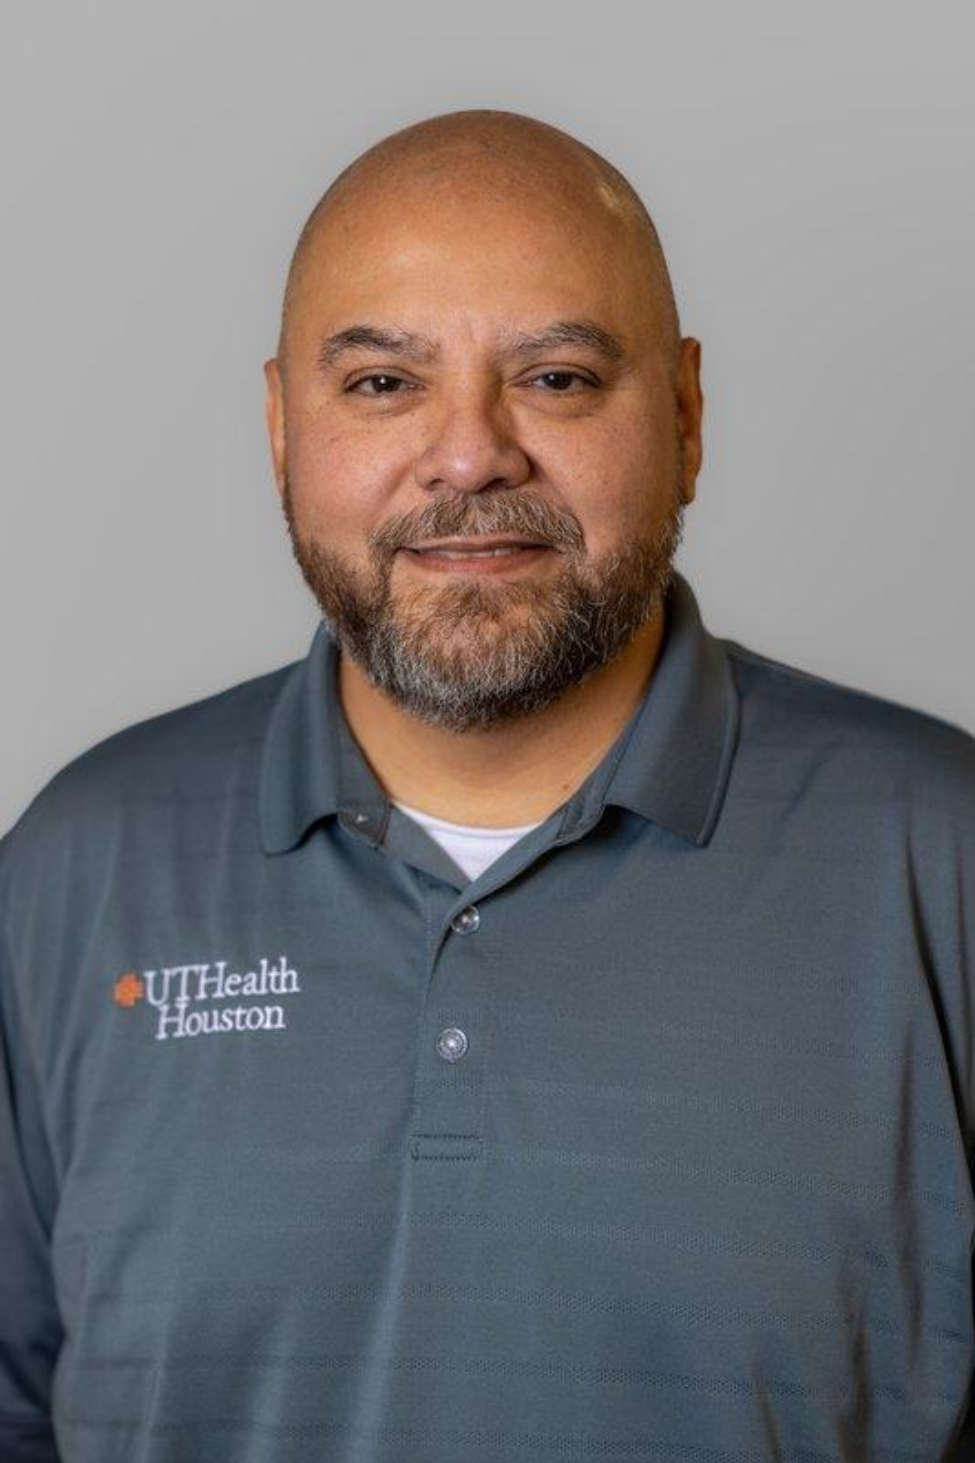 David Posado, manager of the IT Solution Center. (Photo by Nathan Jeter/UTHealth Houston)